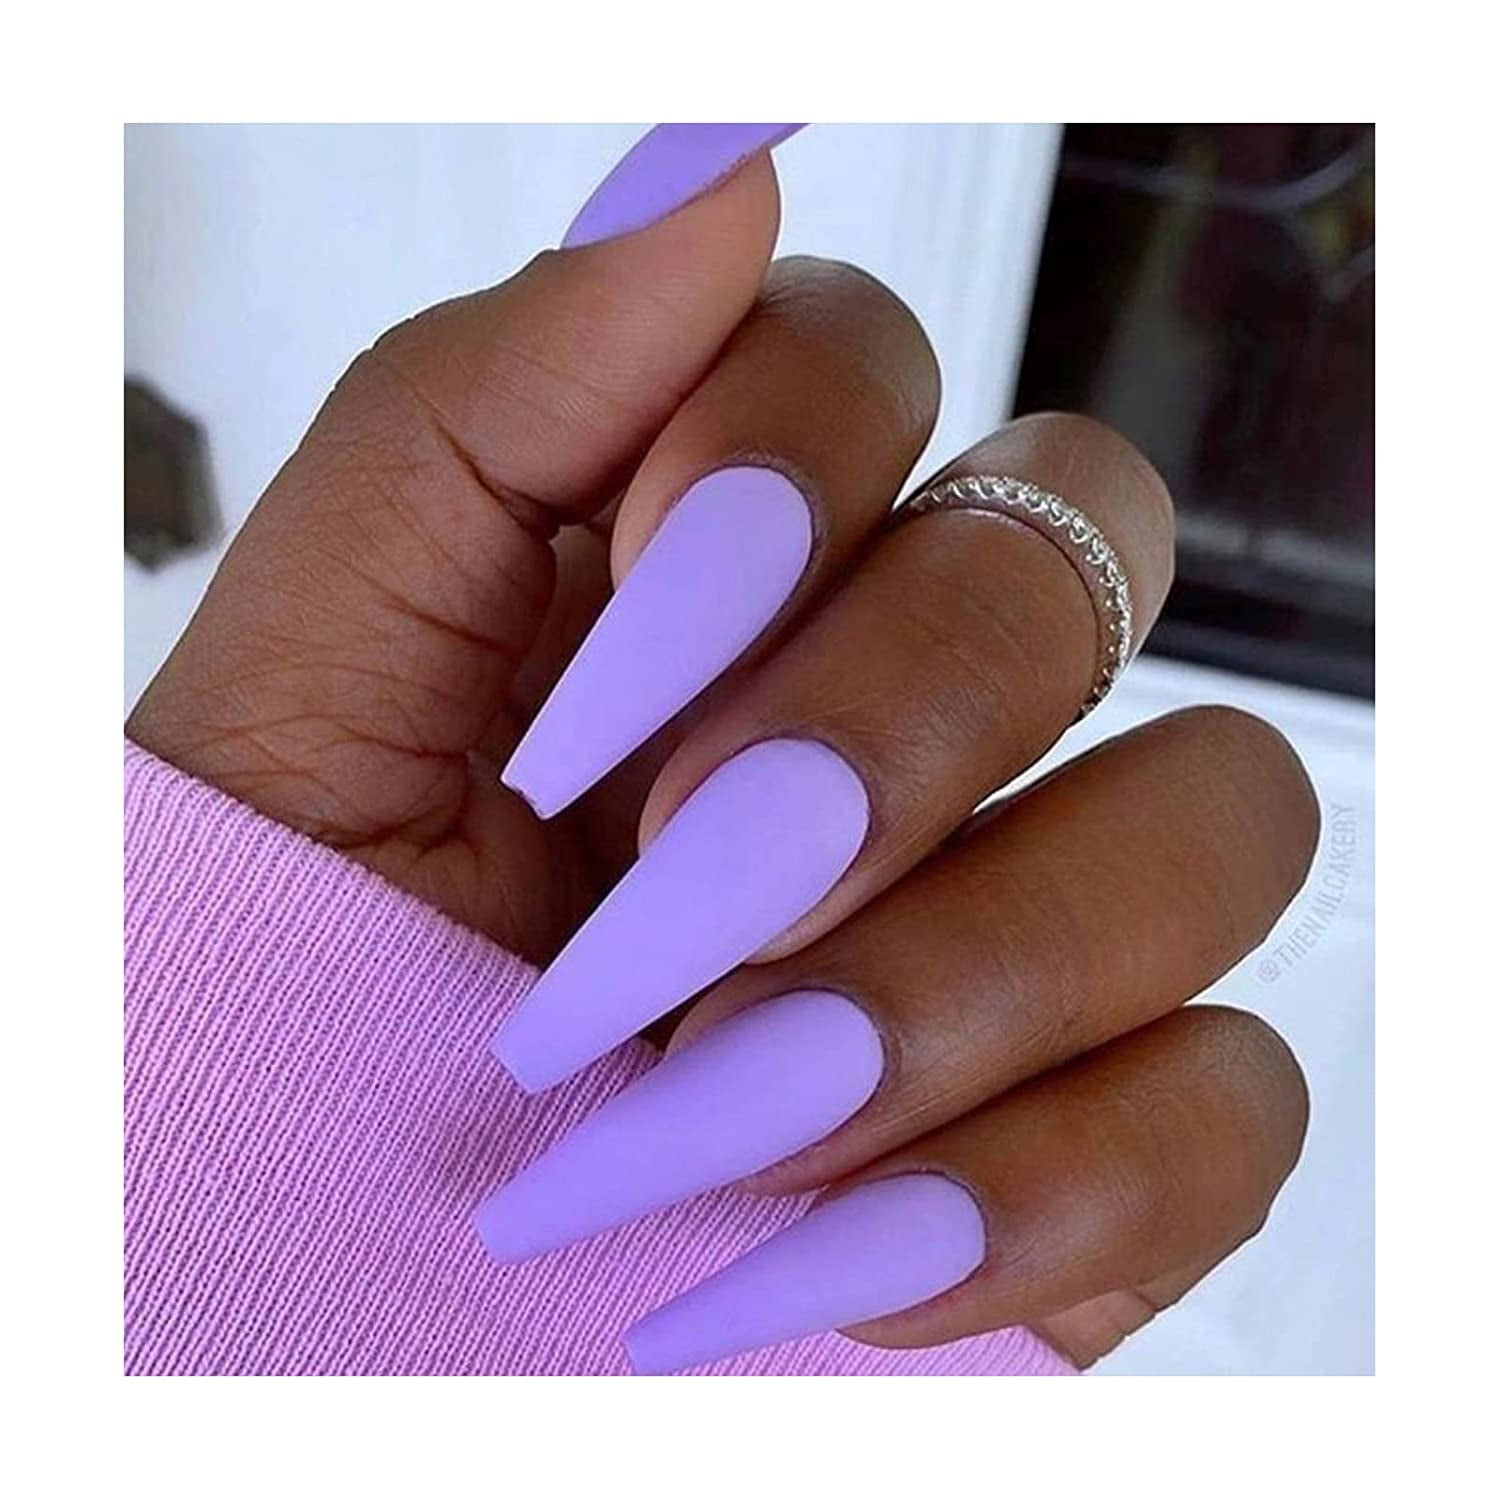 Press on Nails Long Color Gel Fake Nail, Solid Color Manicure Set Including  Jelly Glue, Nail File, Cuticle Stick, 24 Pcs. (purple \u2013 frosted) 